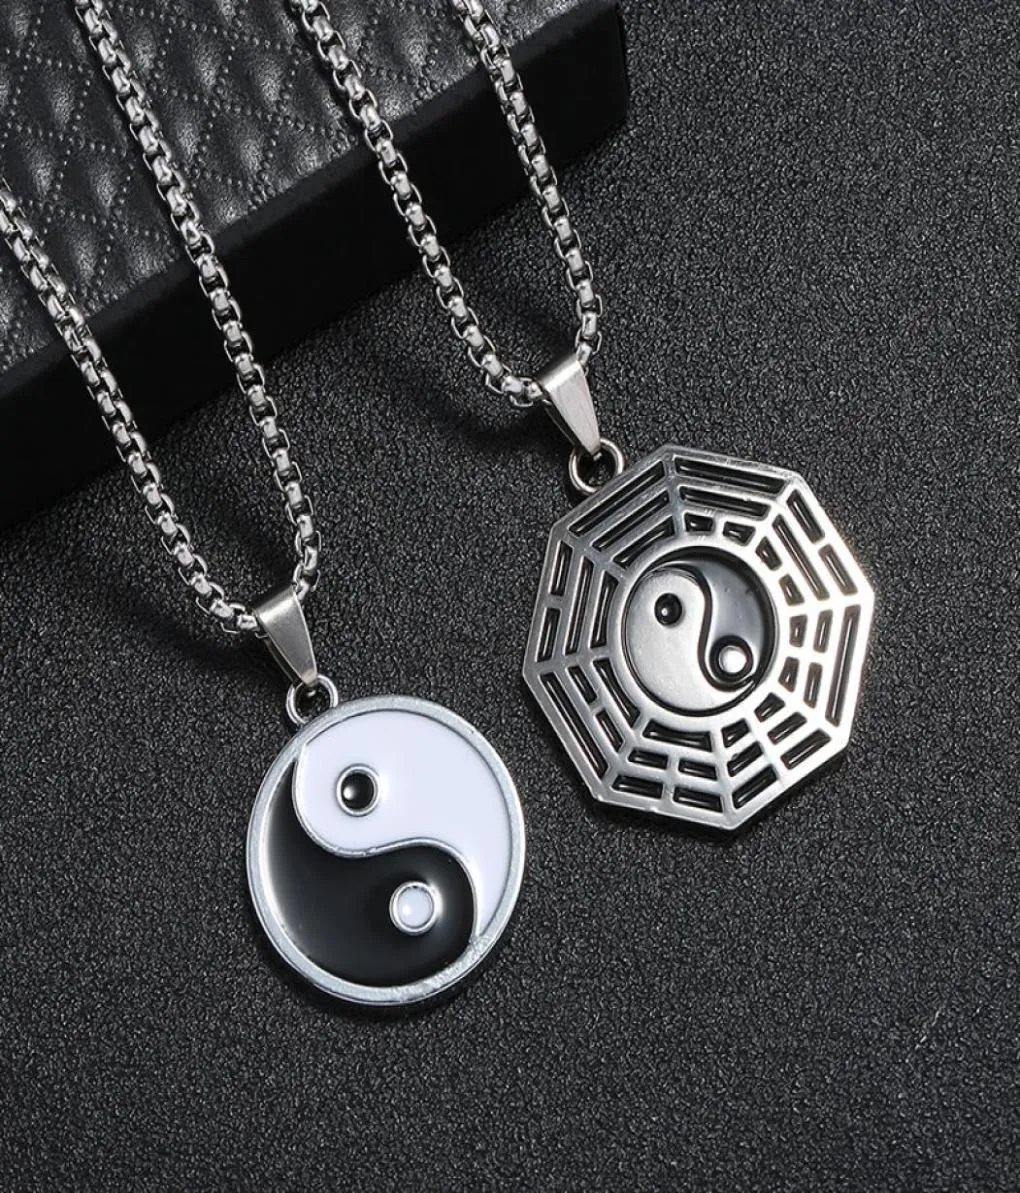 New Stainless Steel Yin Ying Yang Pendant Necklace Black White Necklace Men PU Leather Necklaces Jewelry Vintage8328149